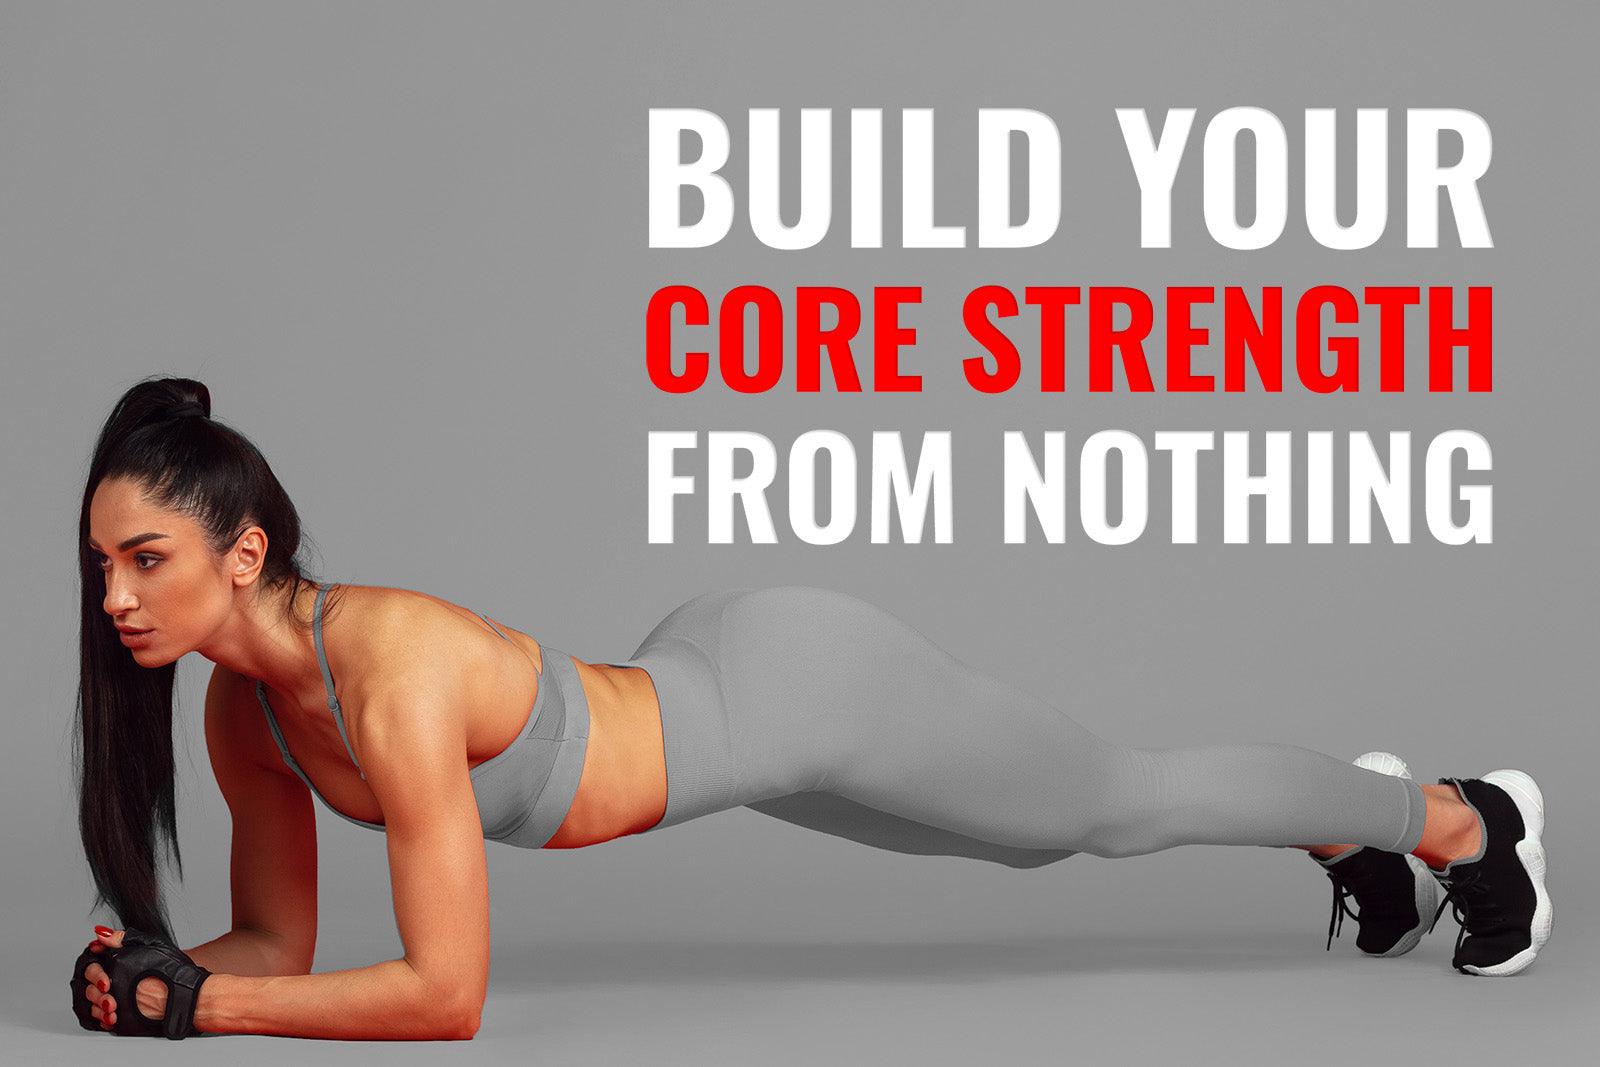 How to Build Core Strength from Nothing?